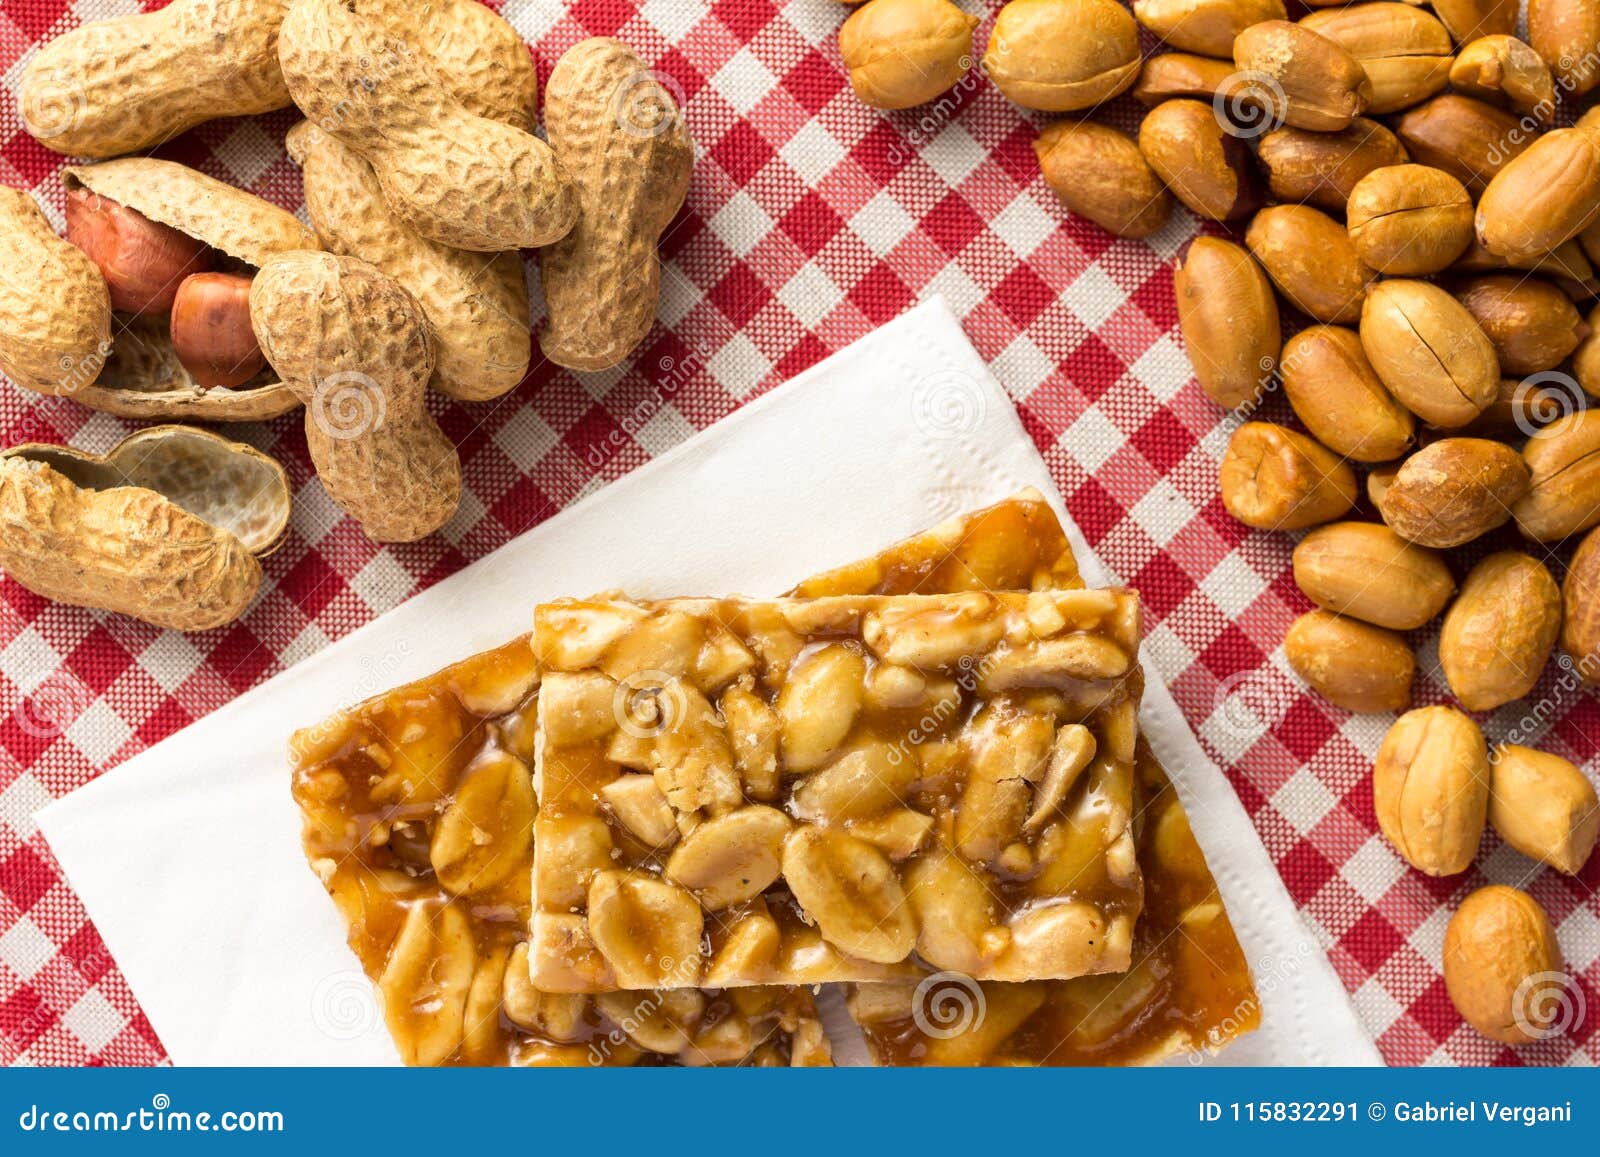 candy with peanut: pe de moleque in brazil and chikki in india.